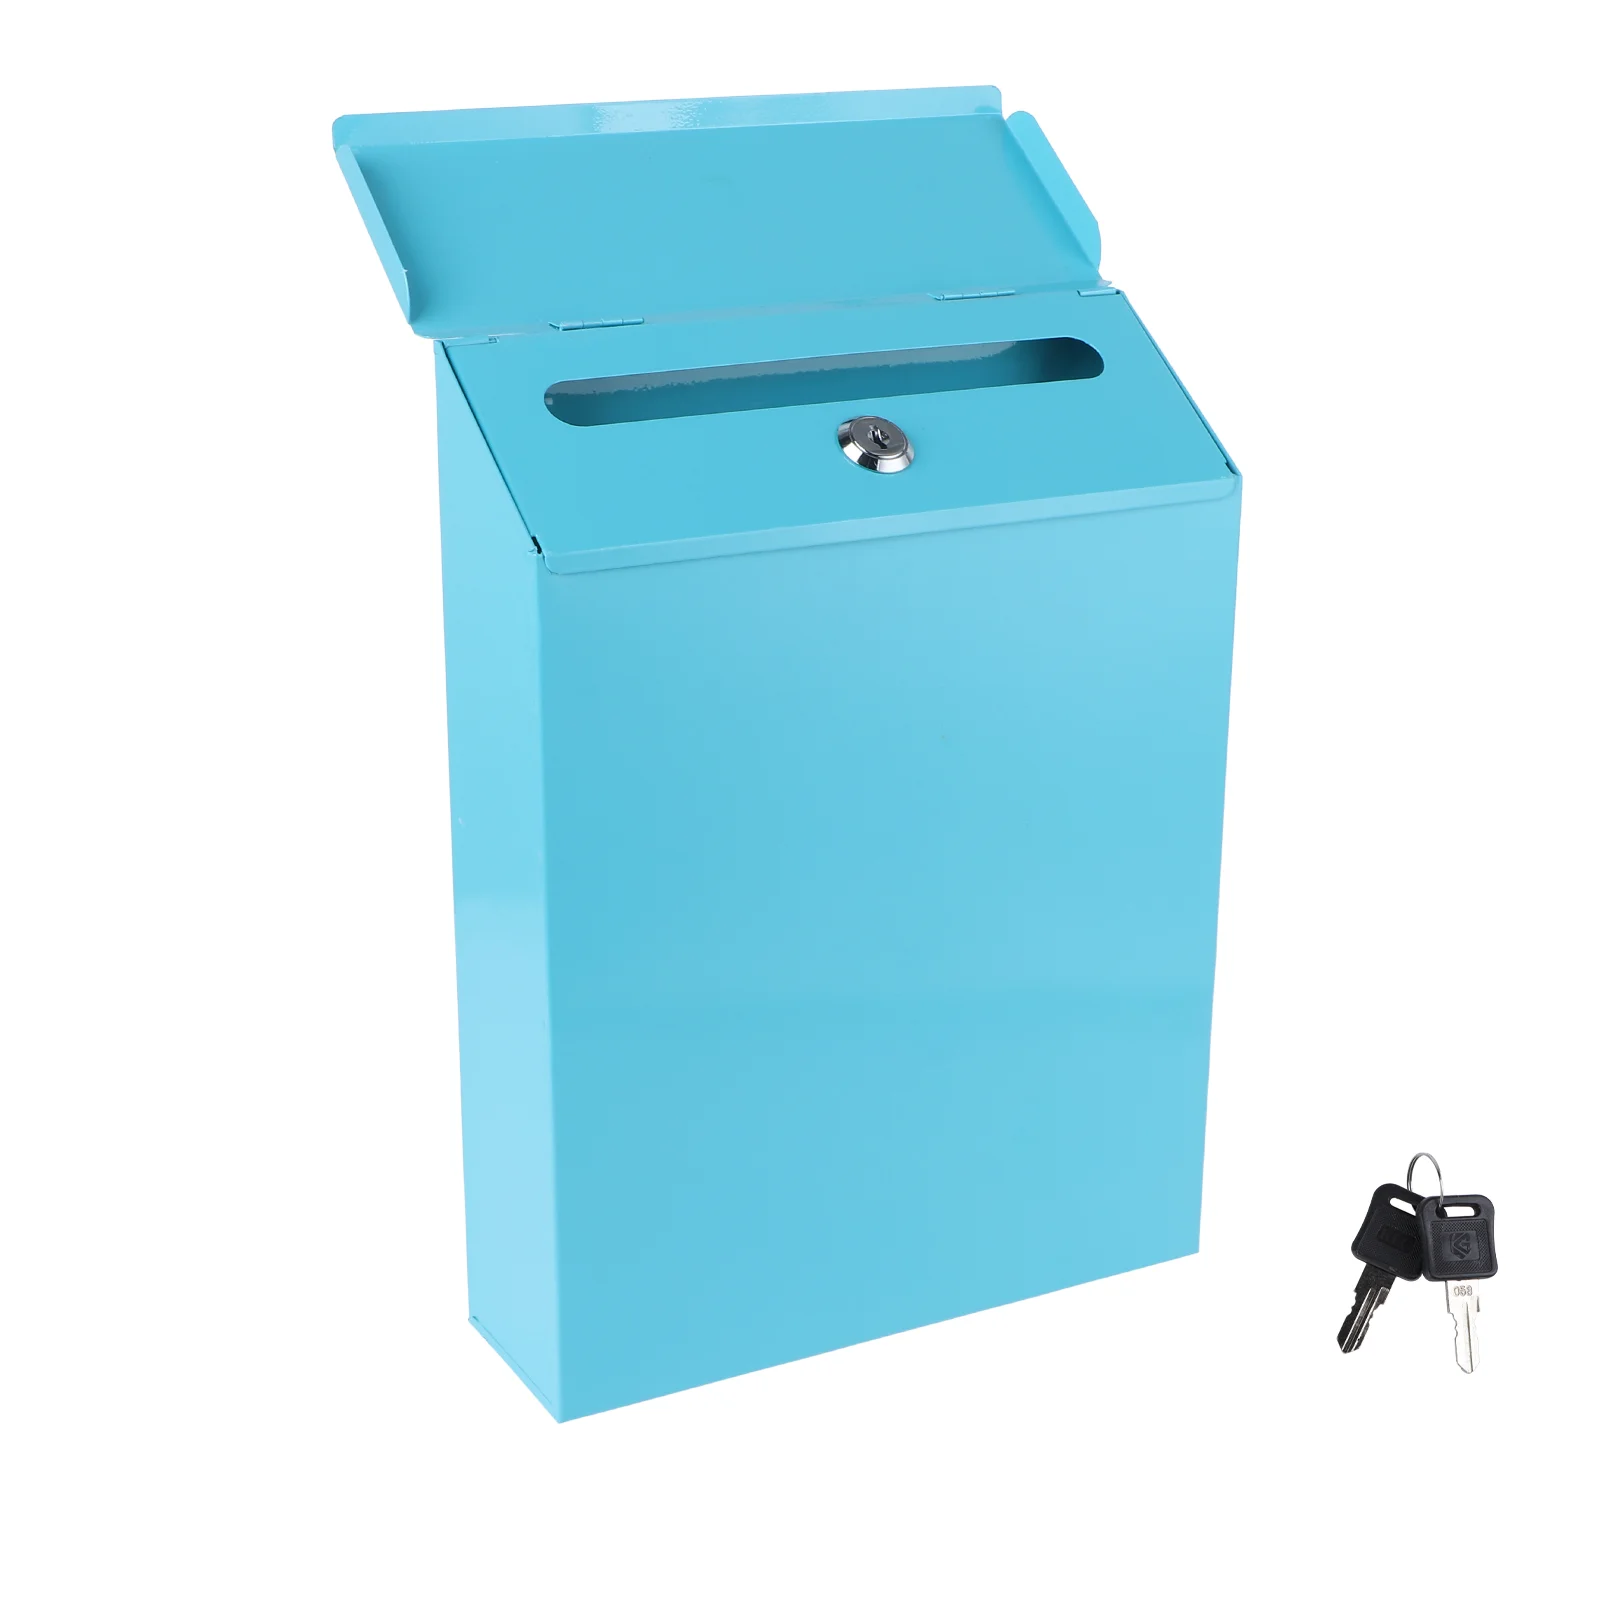 

Wall Mount Mailbox Locking Drop Box Steel Mailbox Rent Payments Mail Keys Weatherproof Galvanized Cover Safe